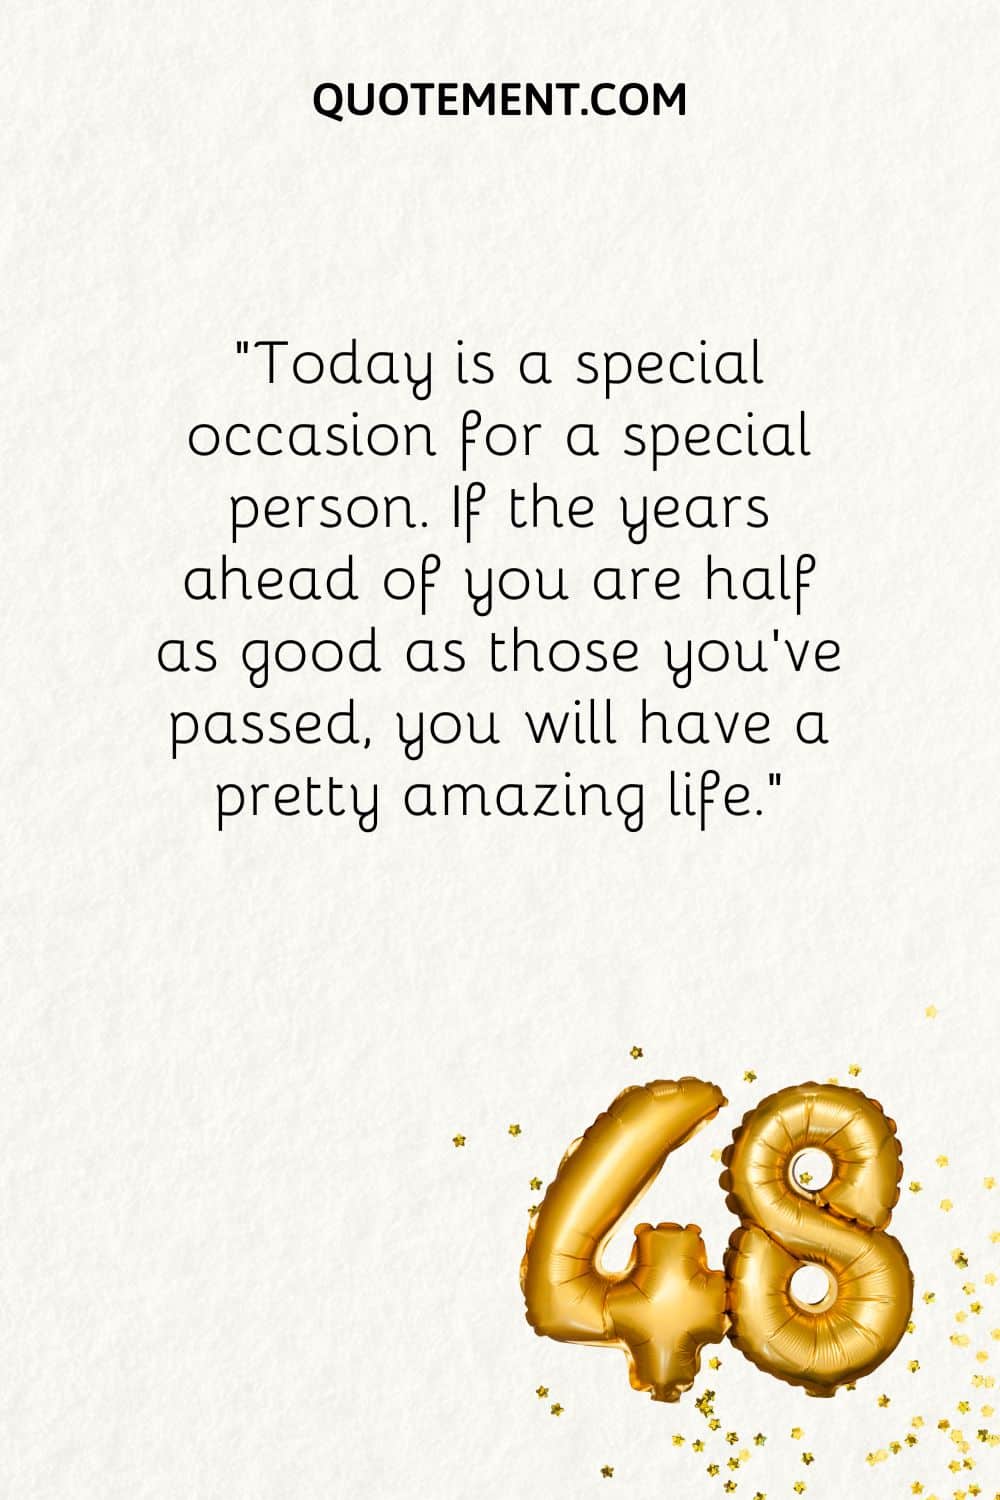 Today is a special occasion for a special person